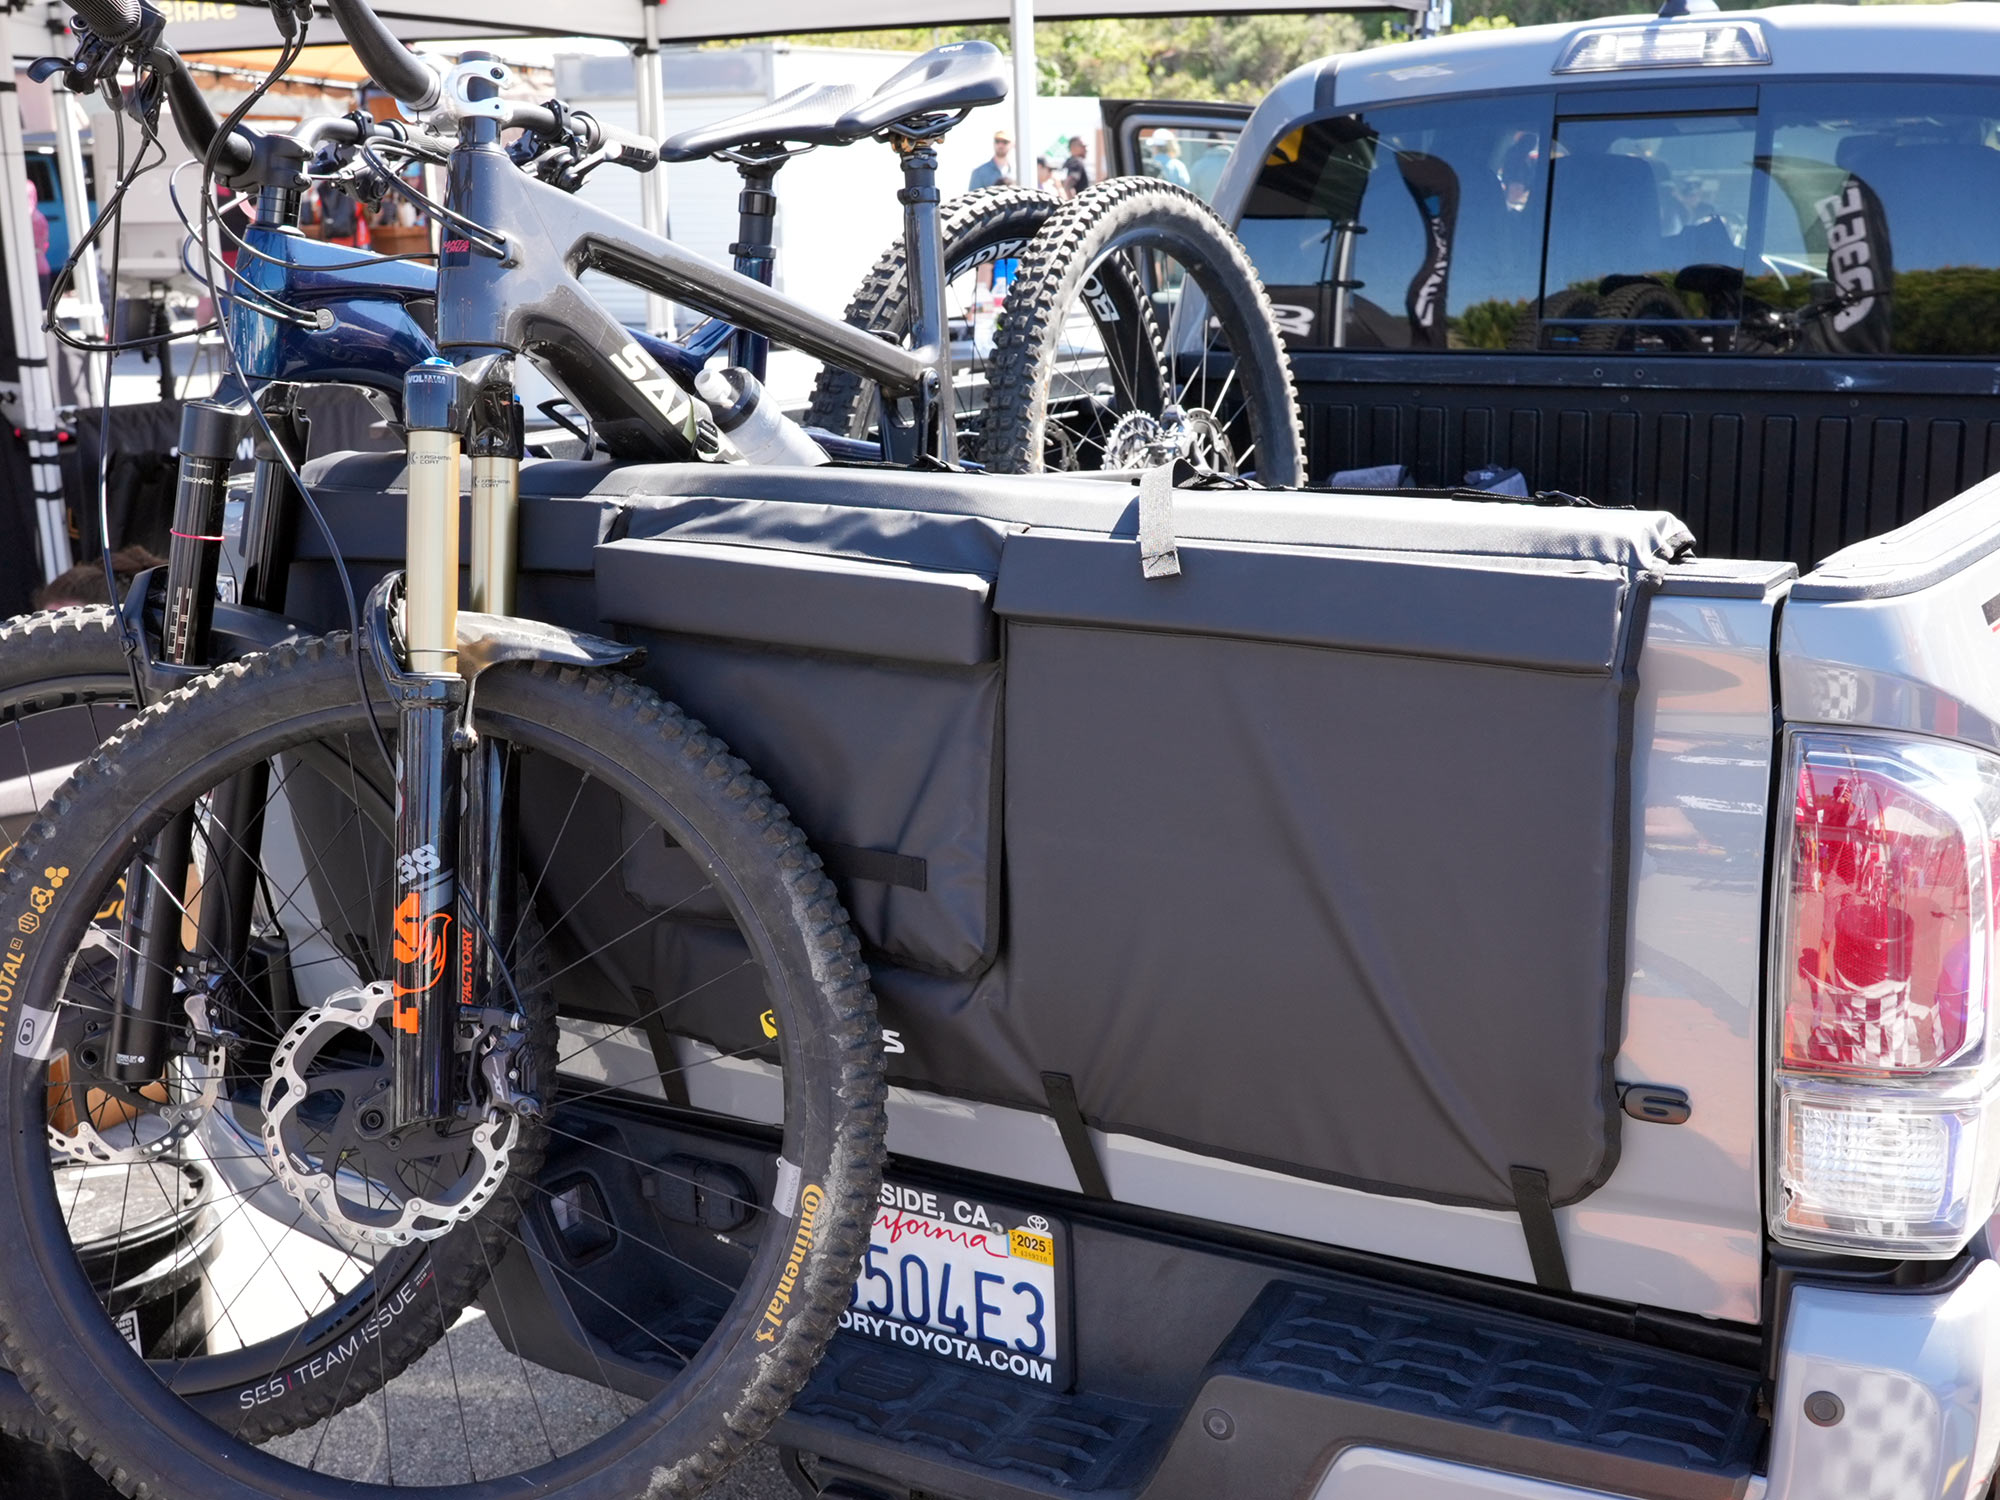 saris tailgate pad for hauling bikes in pickup truck beds